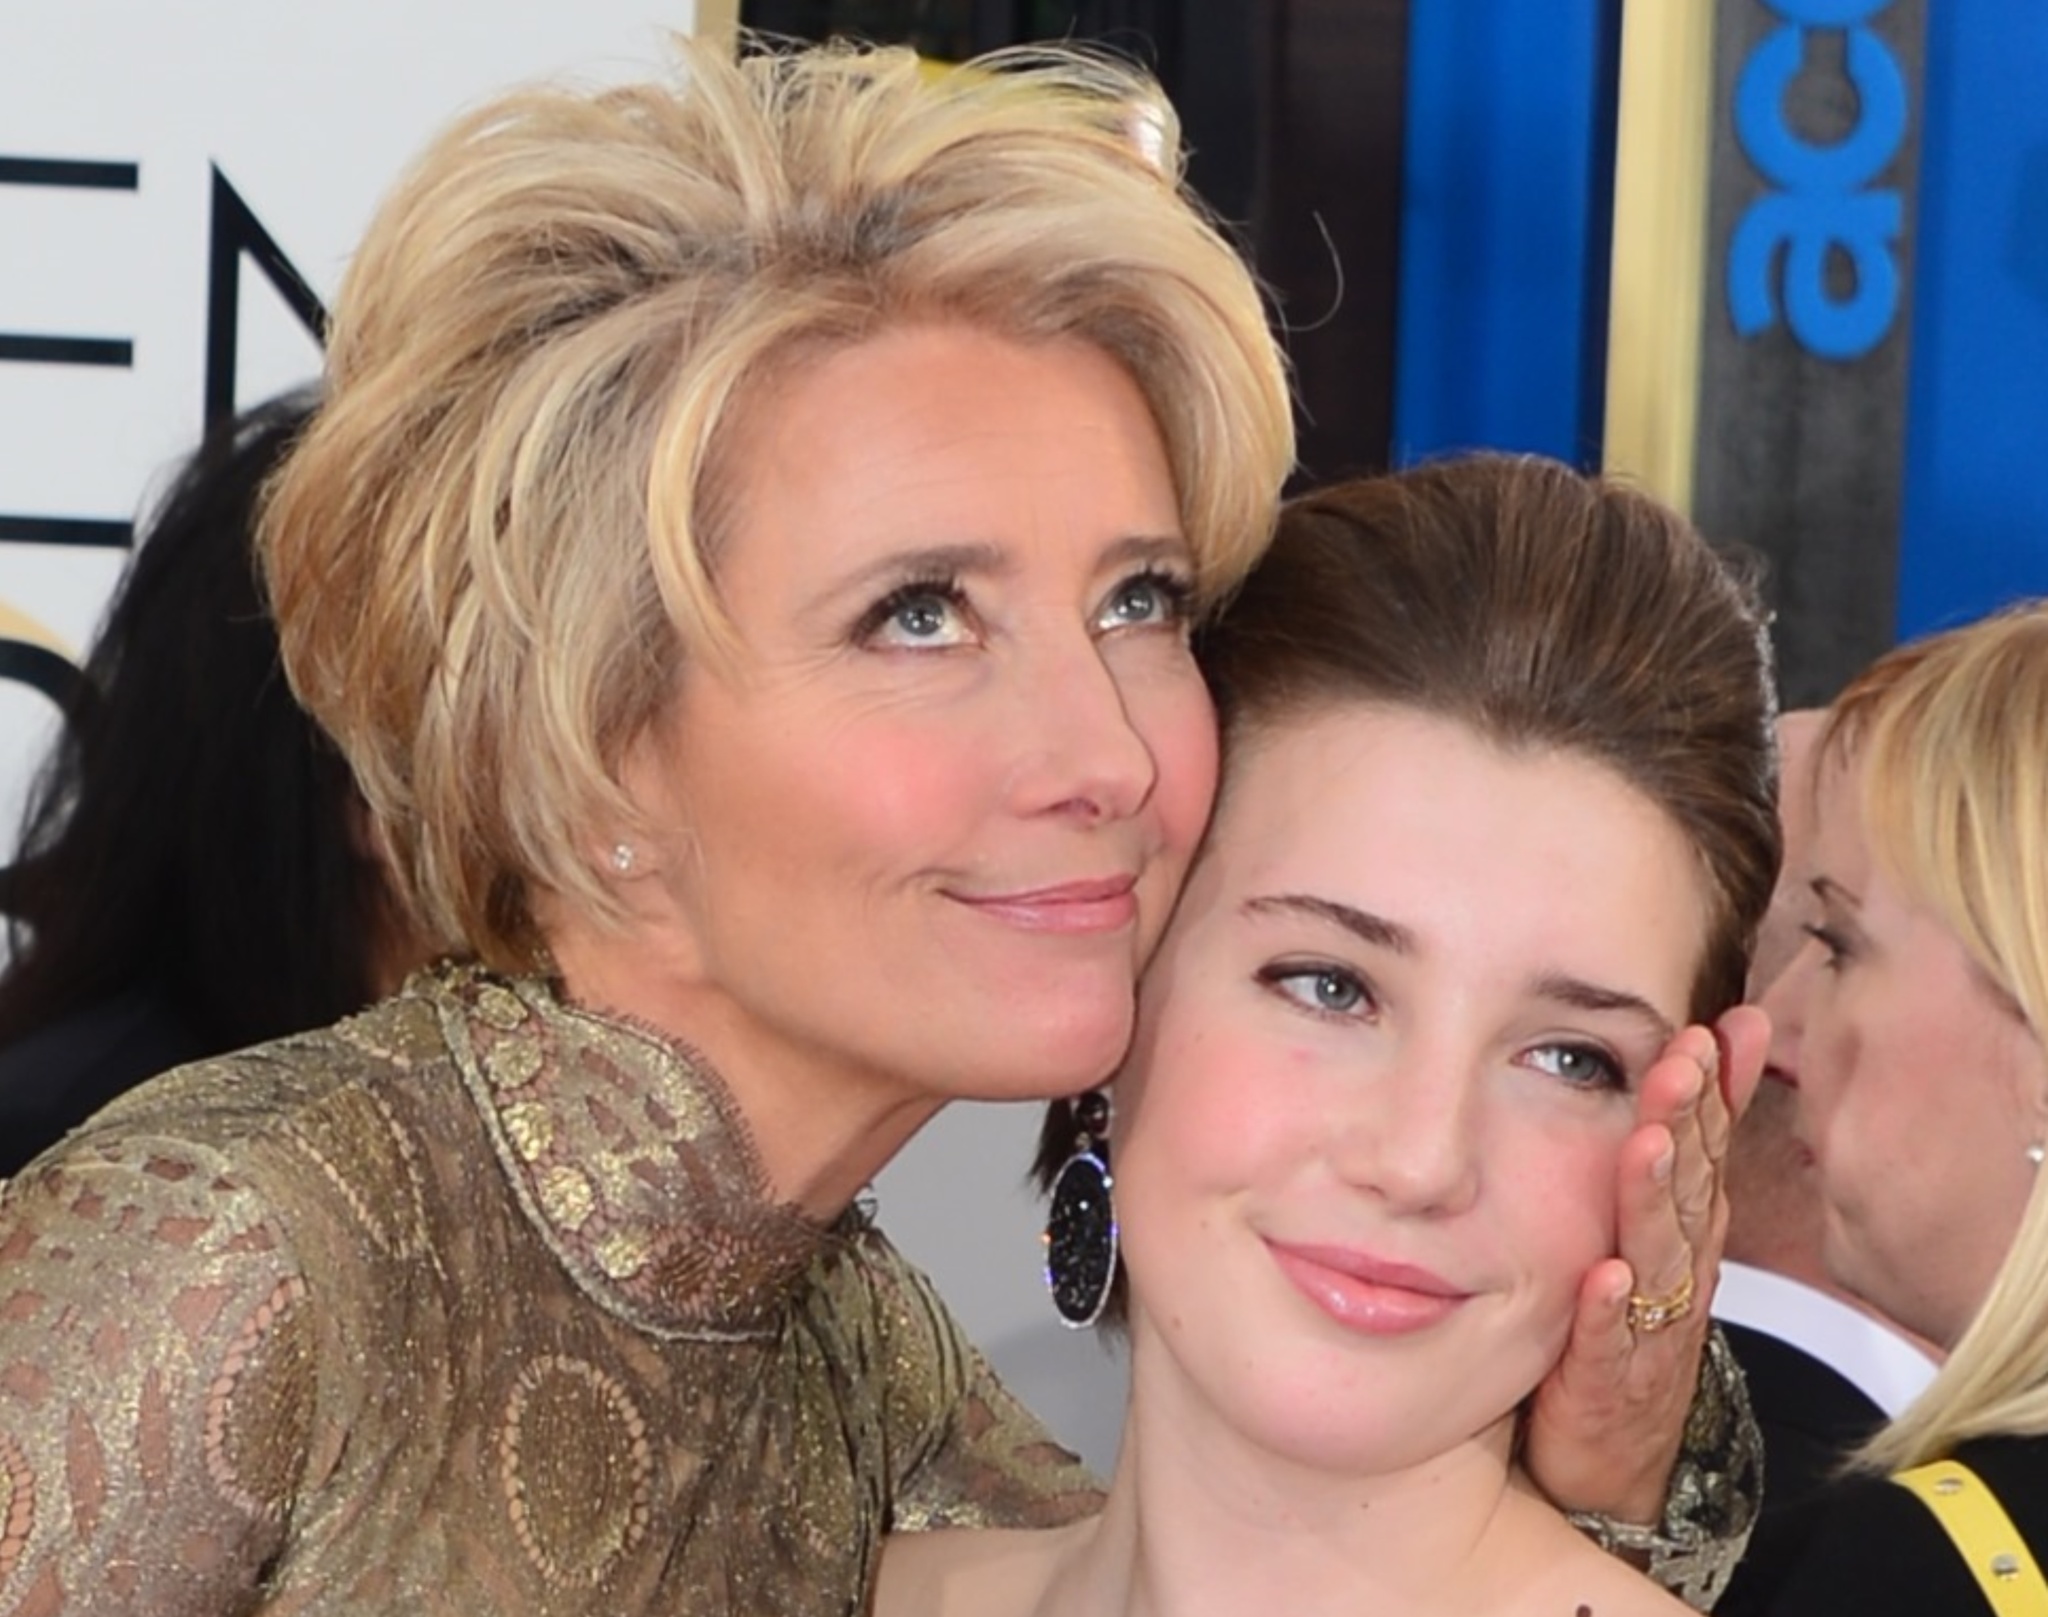 Actress Emma Thompson and daughter Gaia Romilly Wise arrive on the red carpet of the 71st Annual Golden Globe Awards in Beverly Hills, California, on January 12, 2014.